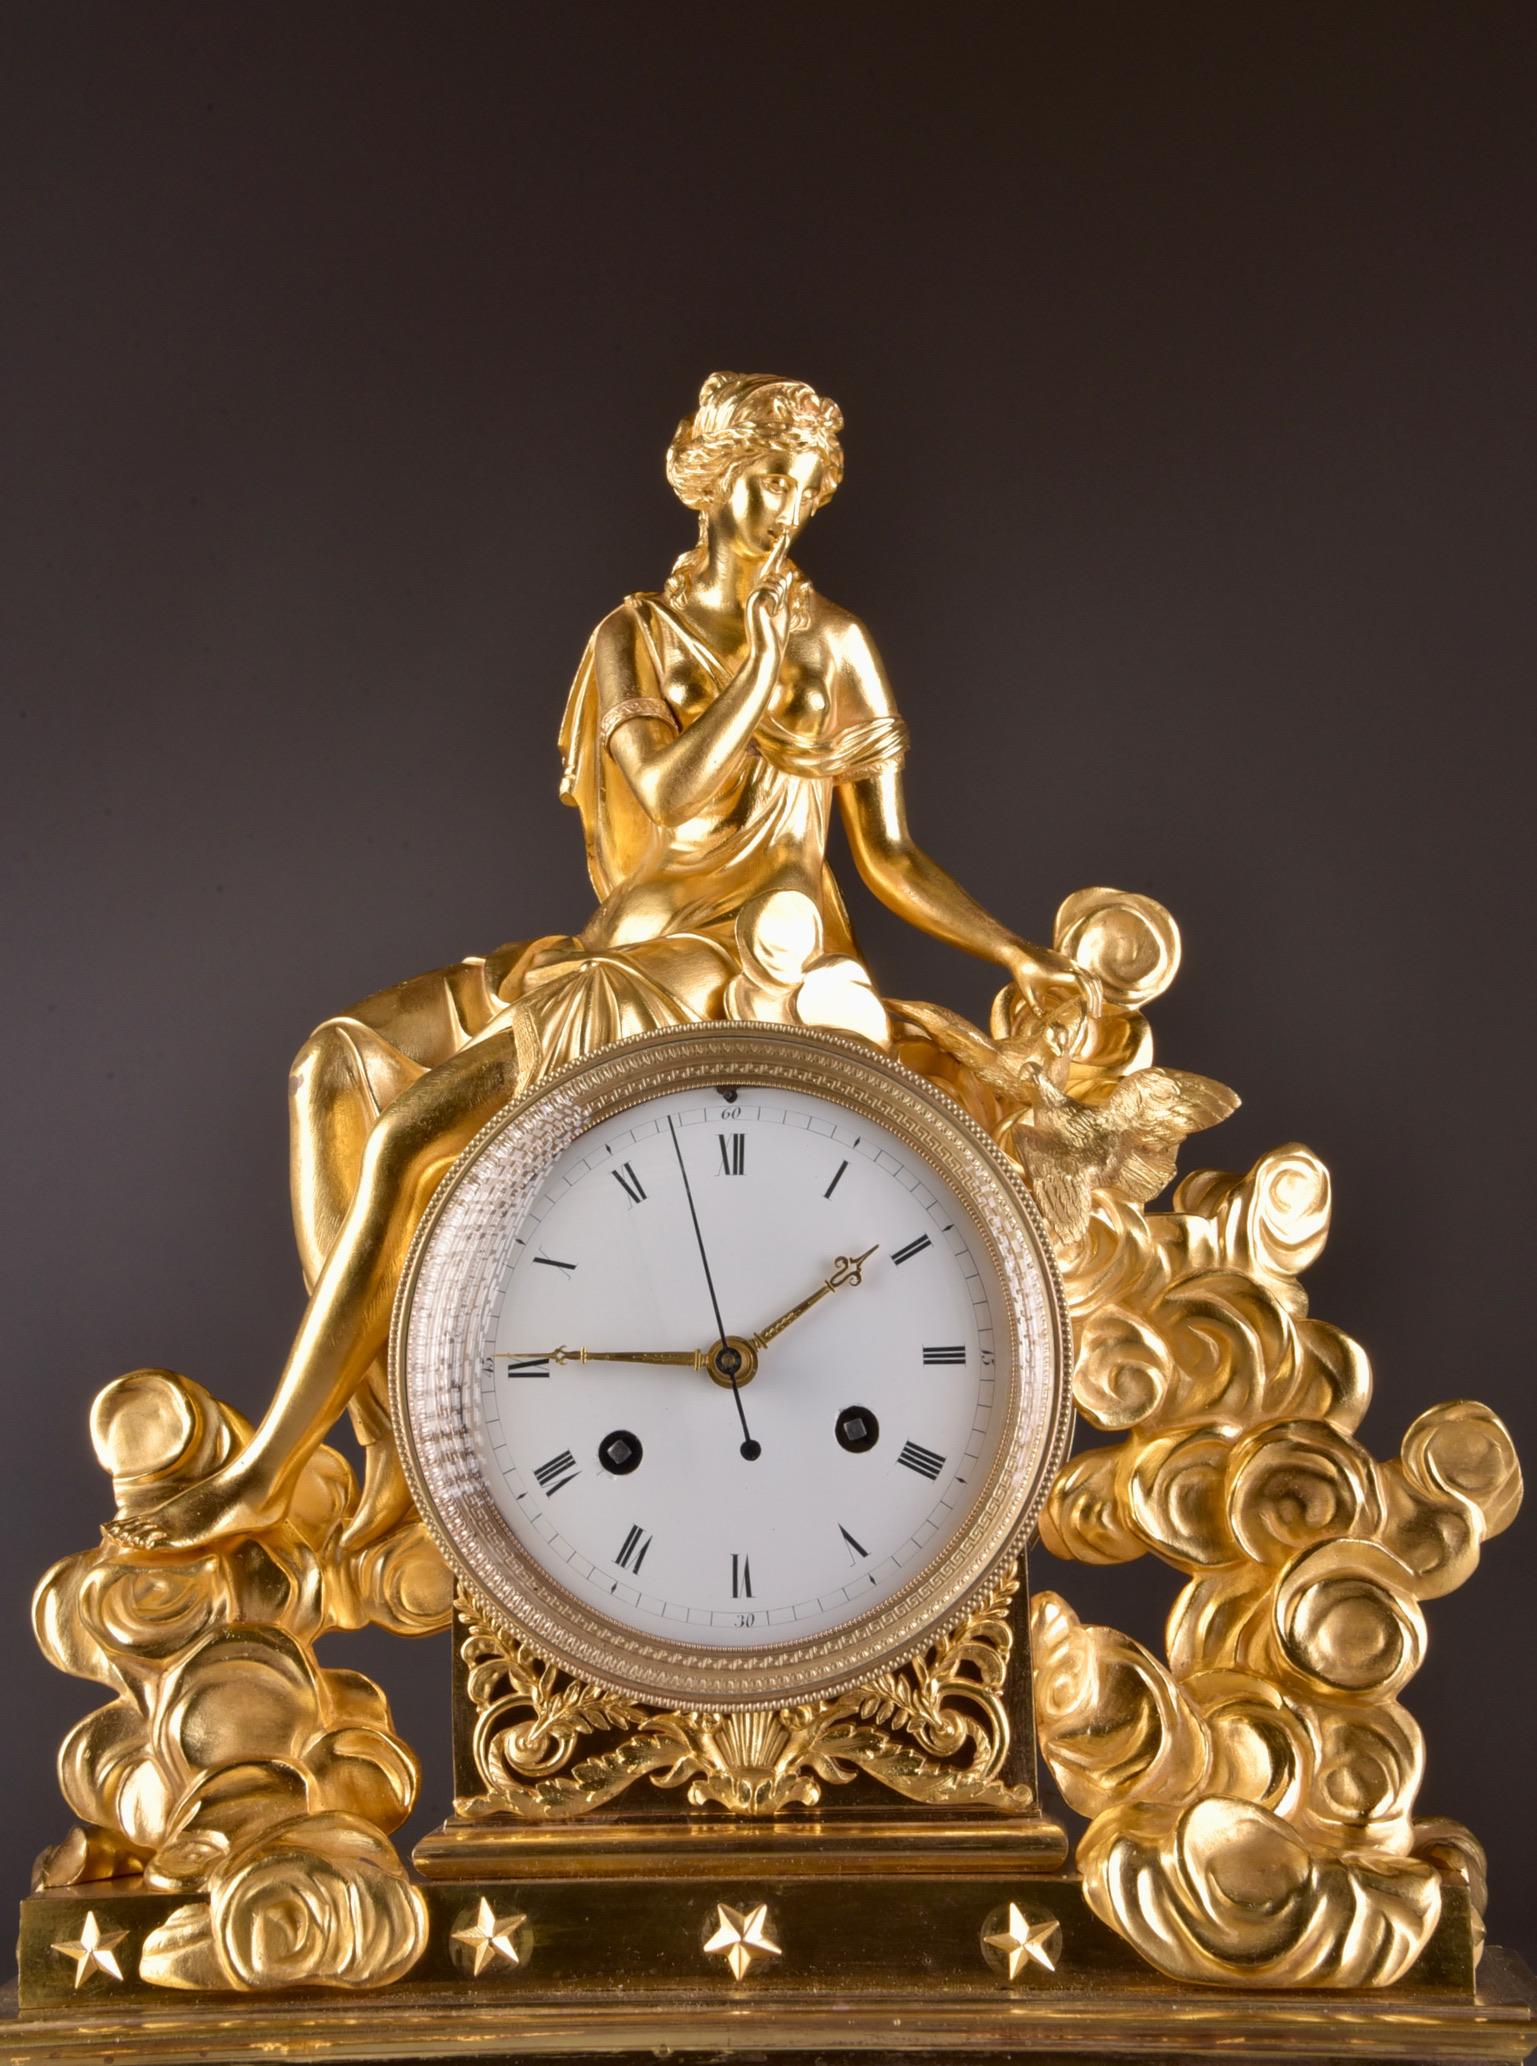 Rare Large Romantic French Directoire Mantel Clock, Late 18th C For Sale 1